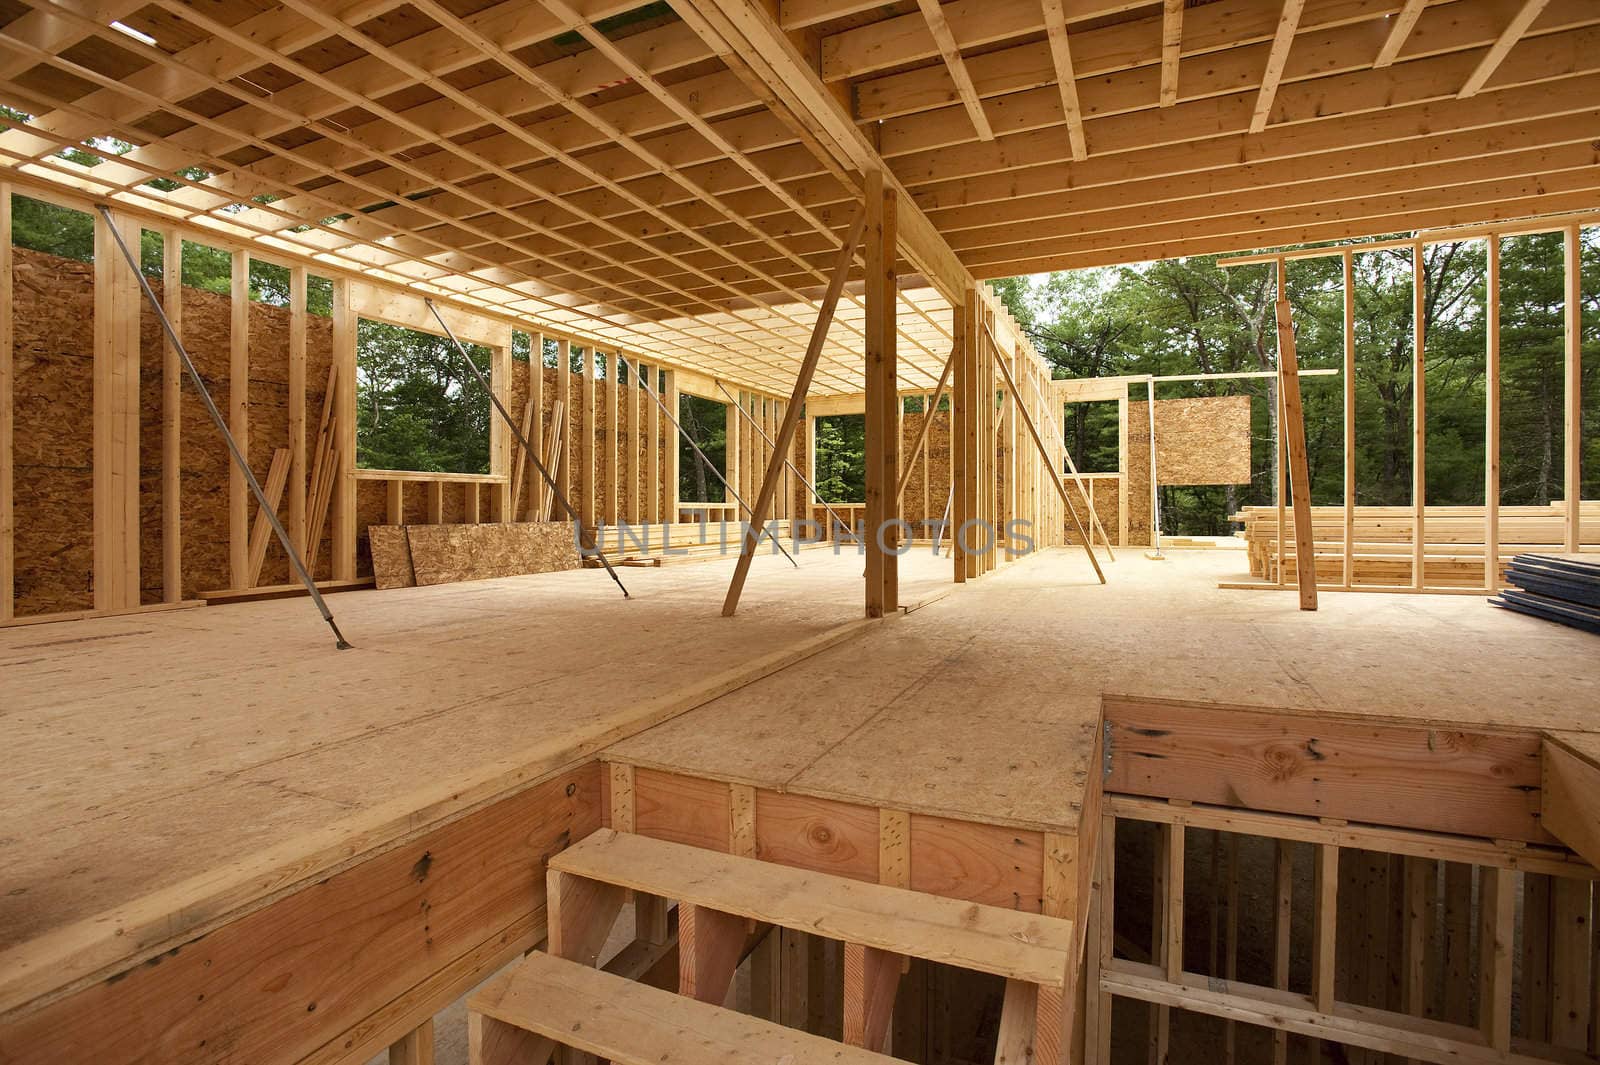 New house interior framing by f/2sumicron